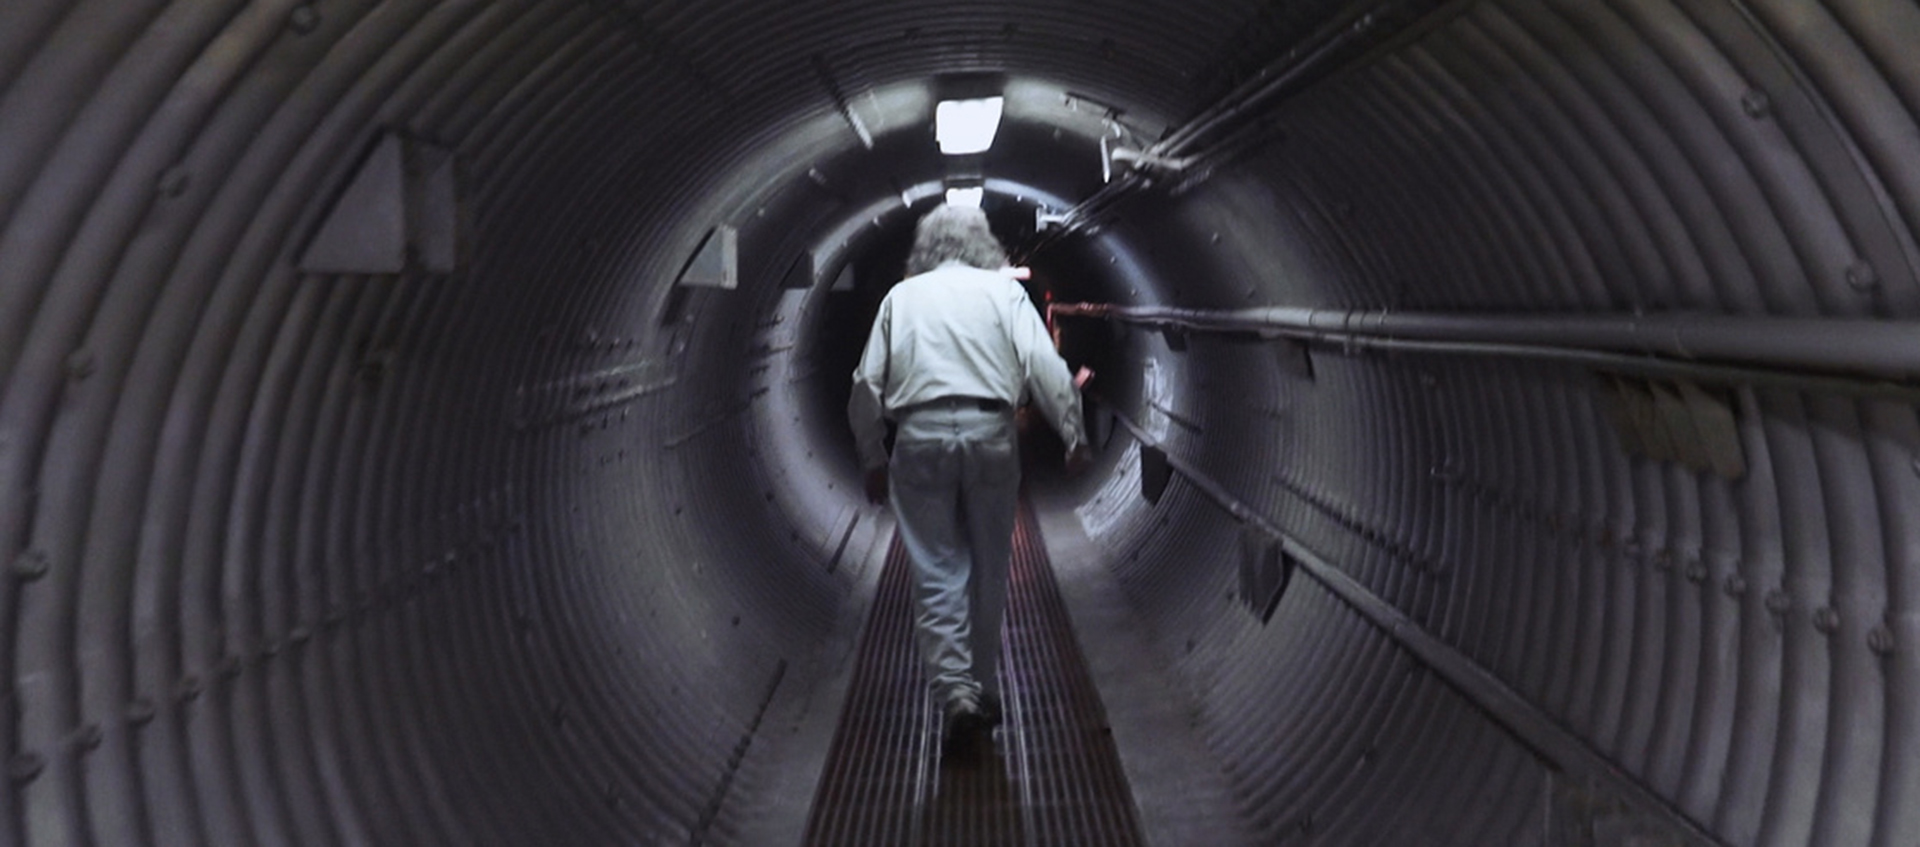 A gray-haired man with his back to the camera walks down a round metal underground tunnel.